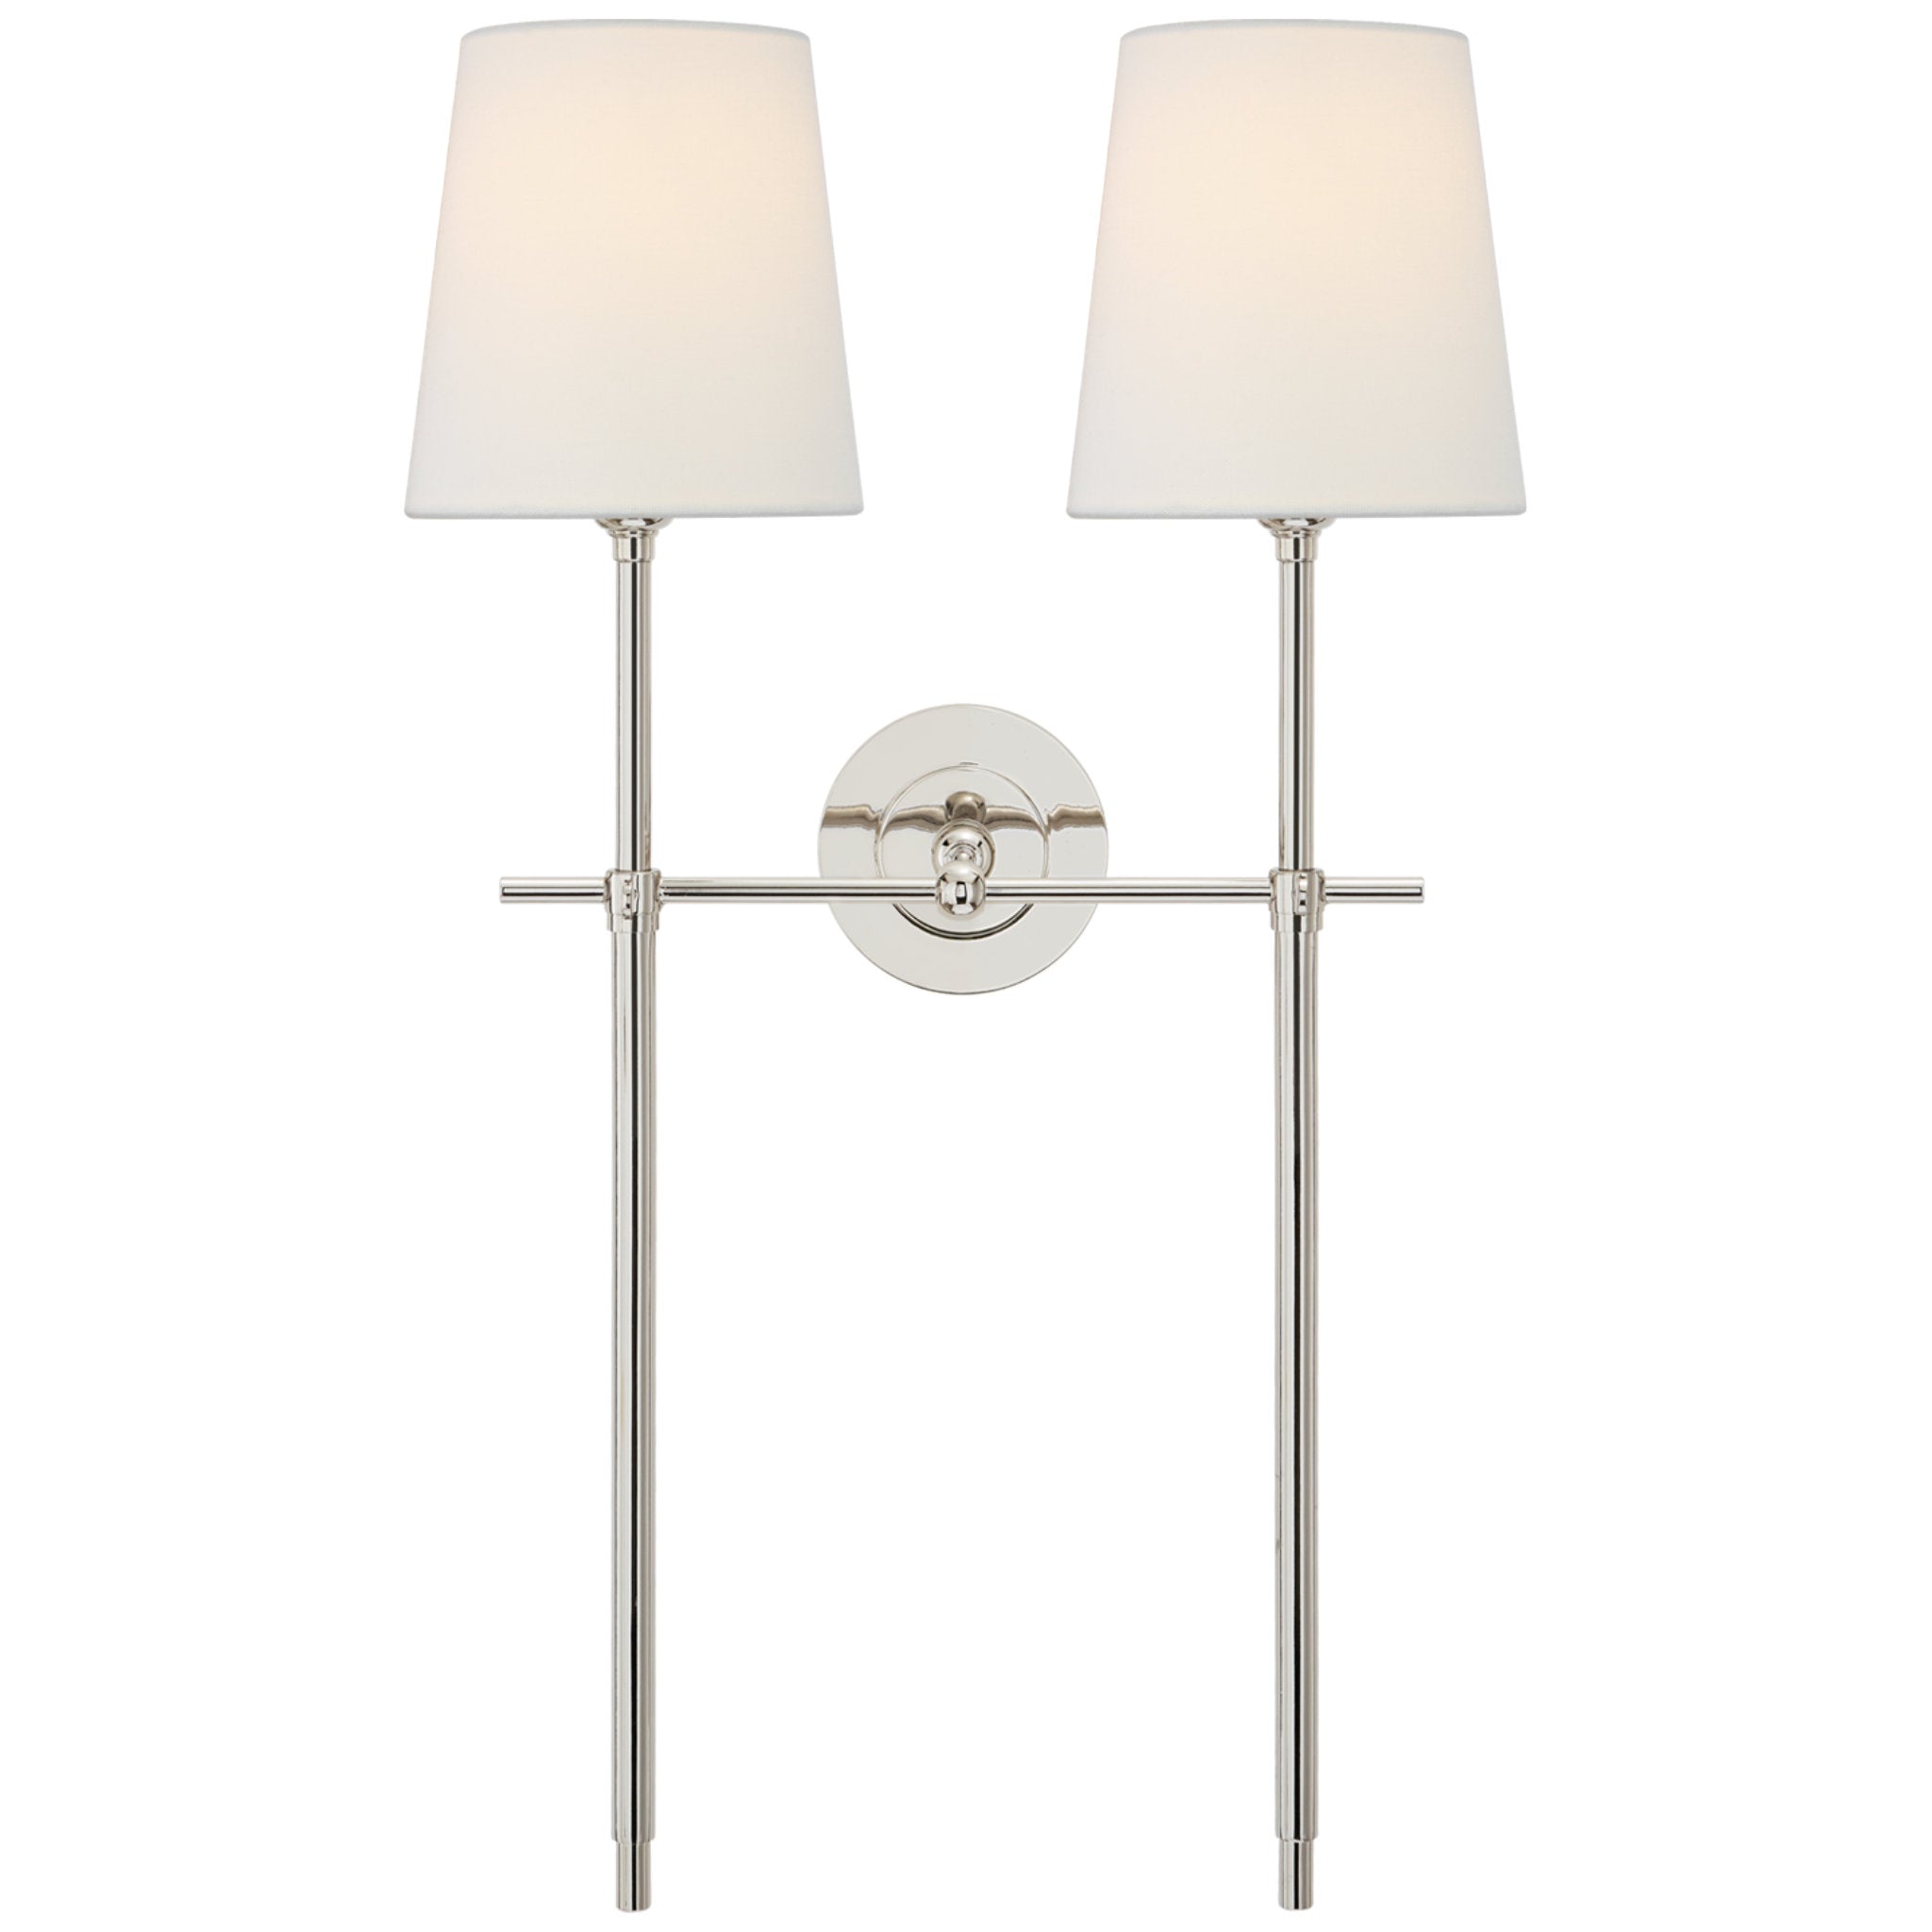 Thomas O'Brien Bryant Large Double Tail Sconce in Polished Nickel with Linen Shades